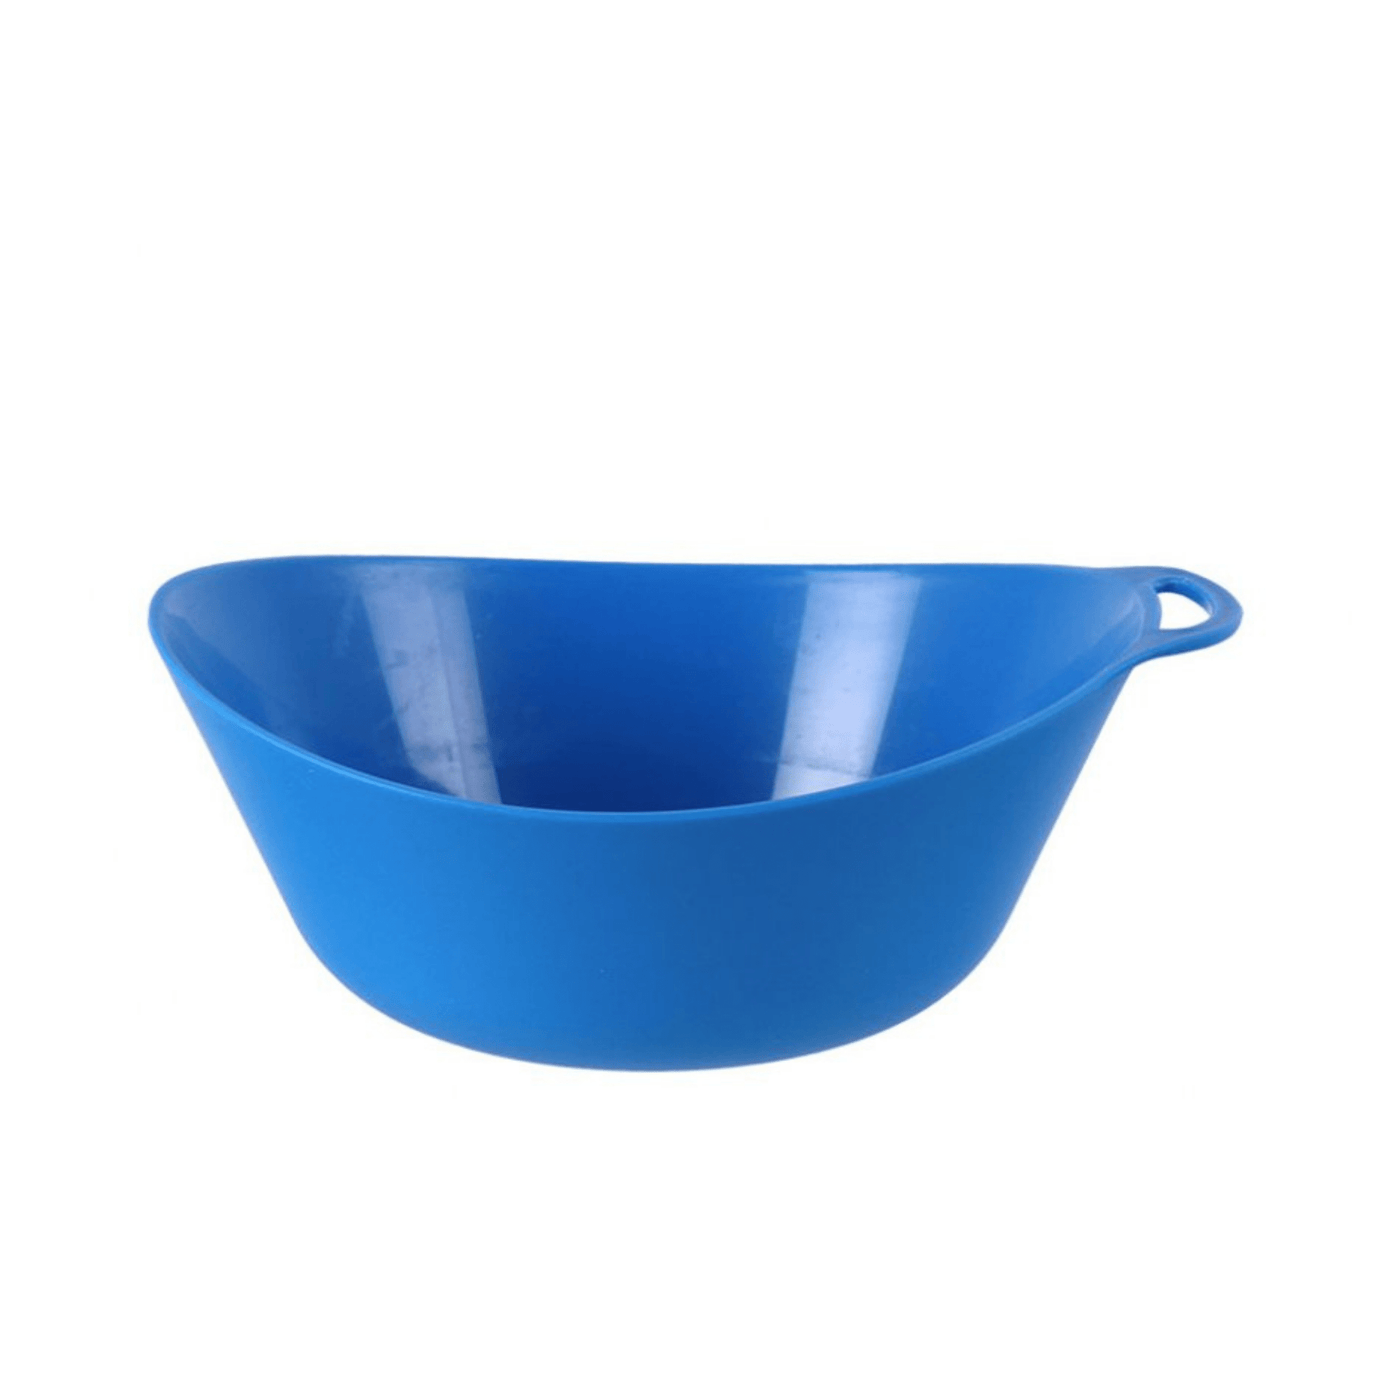 Lifeventure Ellipse Bowl | Outdoor and Camping Cookware | Further Faster Christchurch NZ #blue